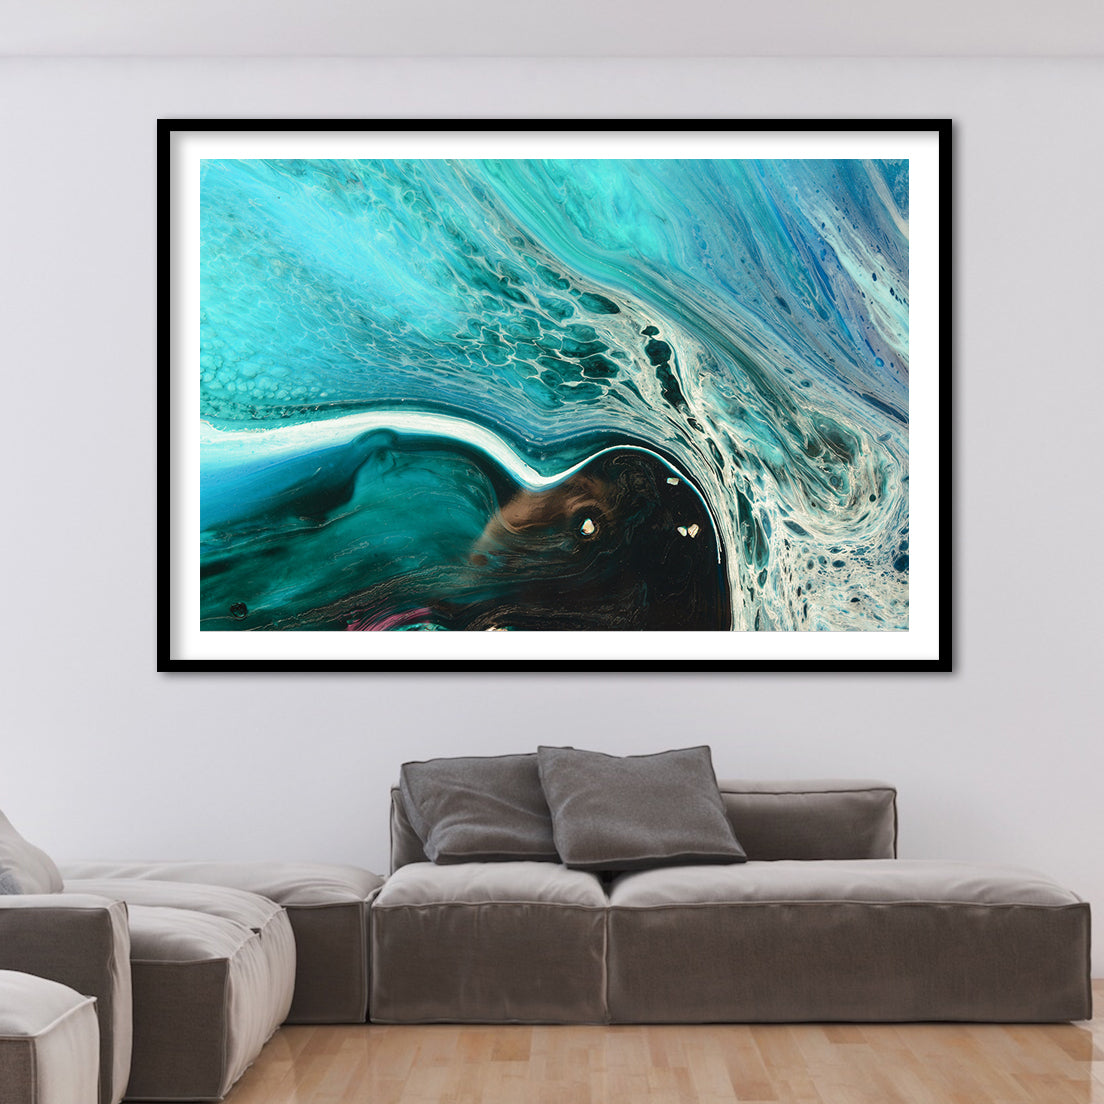 Abstract Seascape. Rise Above Inlet 2 Tropical. Art Print. Antuanelle 3 Tropical Artwork. Limited Edition Print